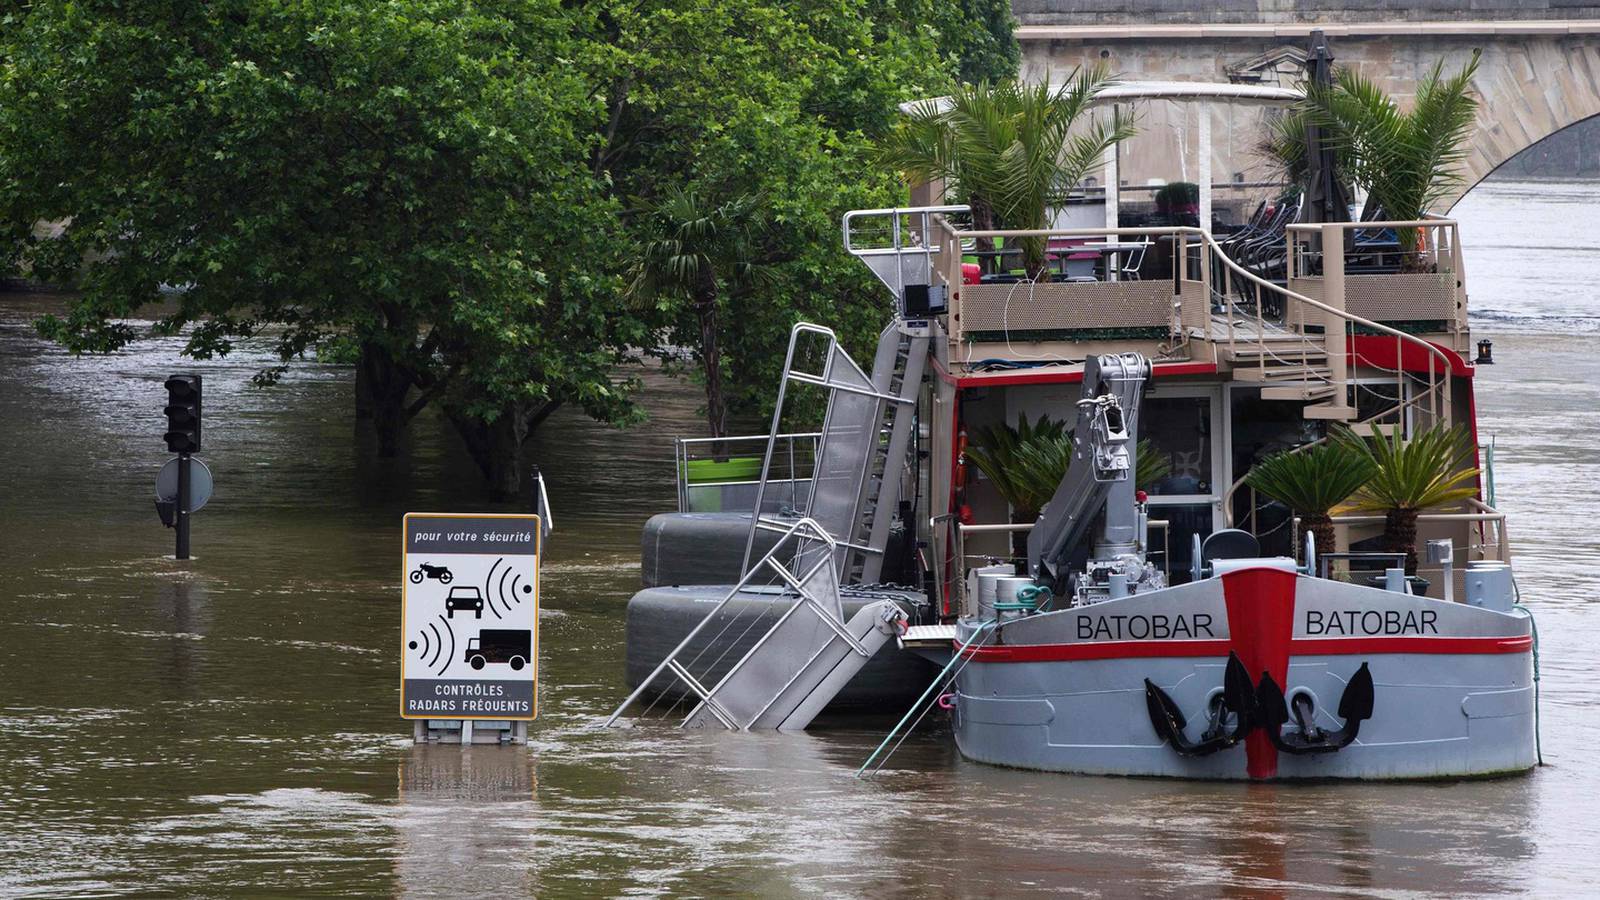 Paris attractions reopen as Seine water levels begin to subside The